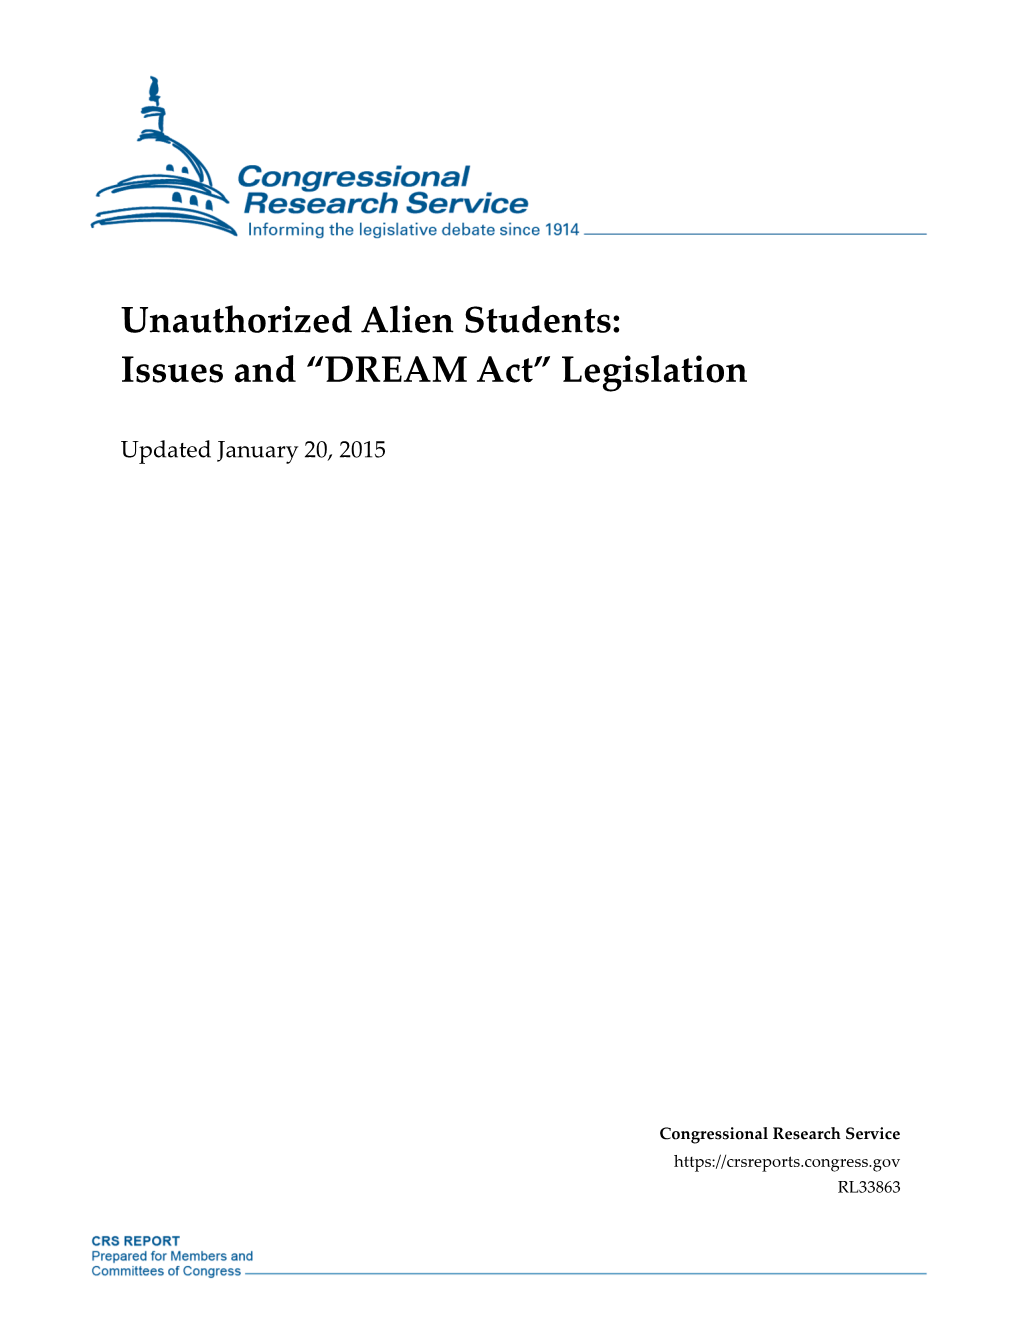 Unauthorized Alien Students: Issues and “DREAM Act” Legislation